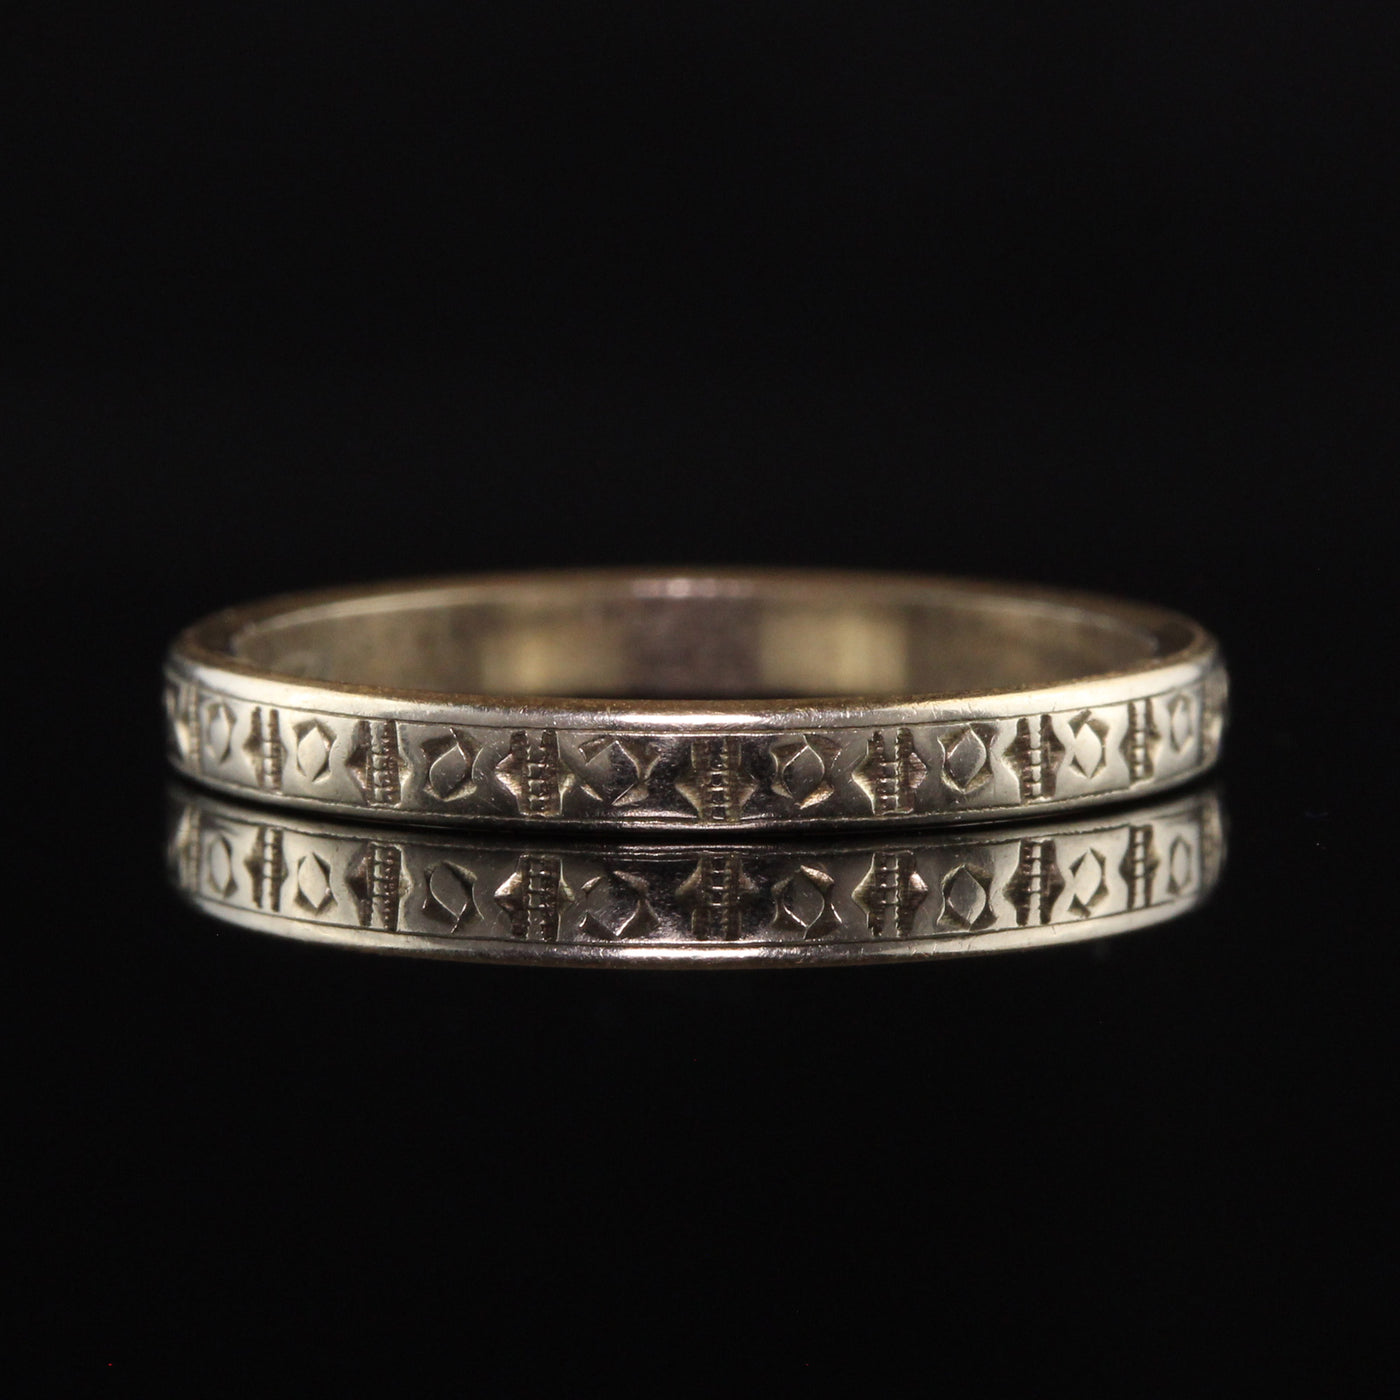 Antique Art Deco 14K Yellow and White Gold Engraved Wedding Band